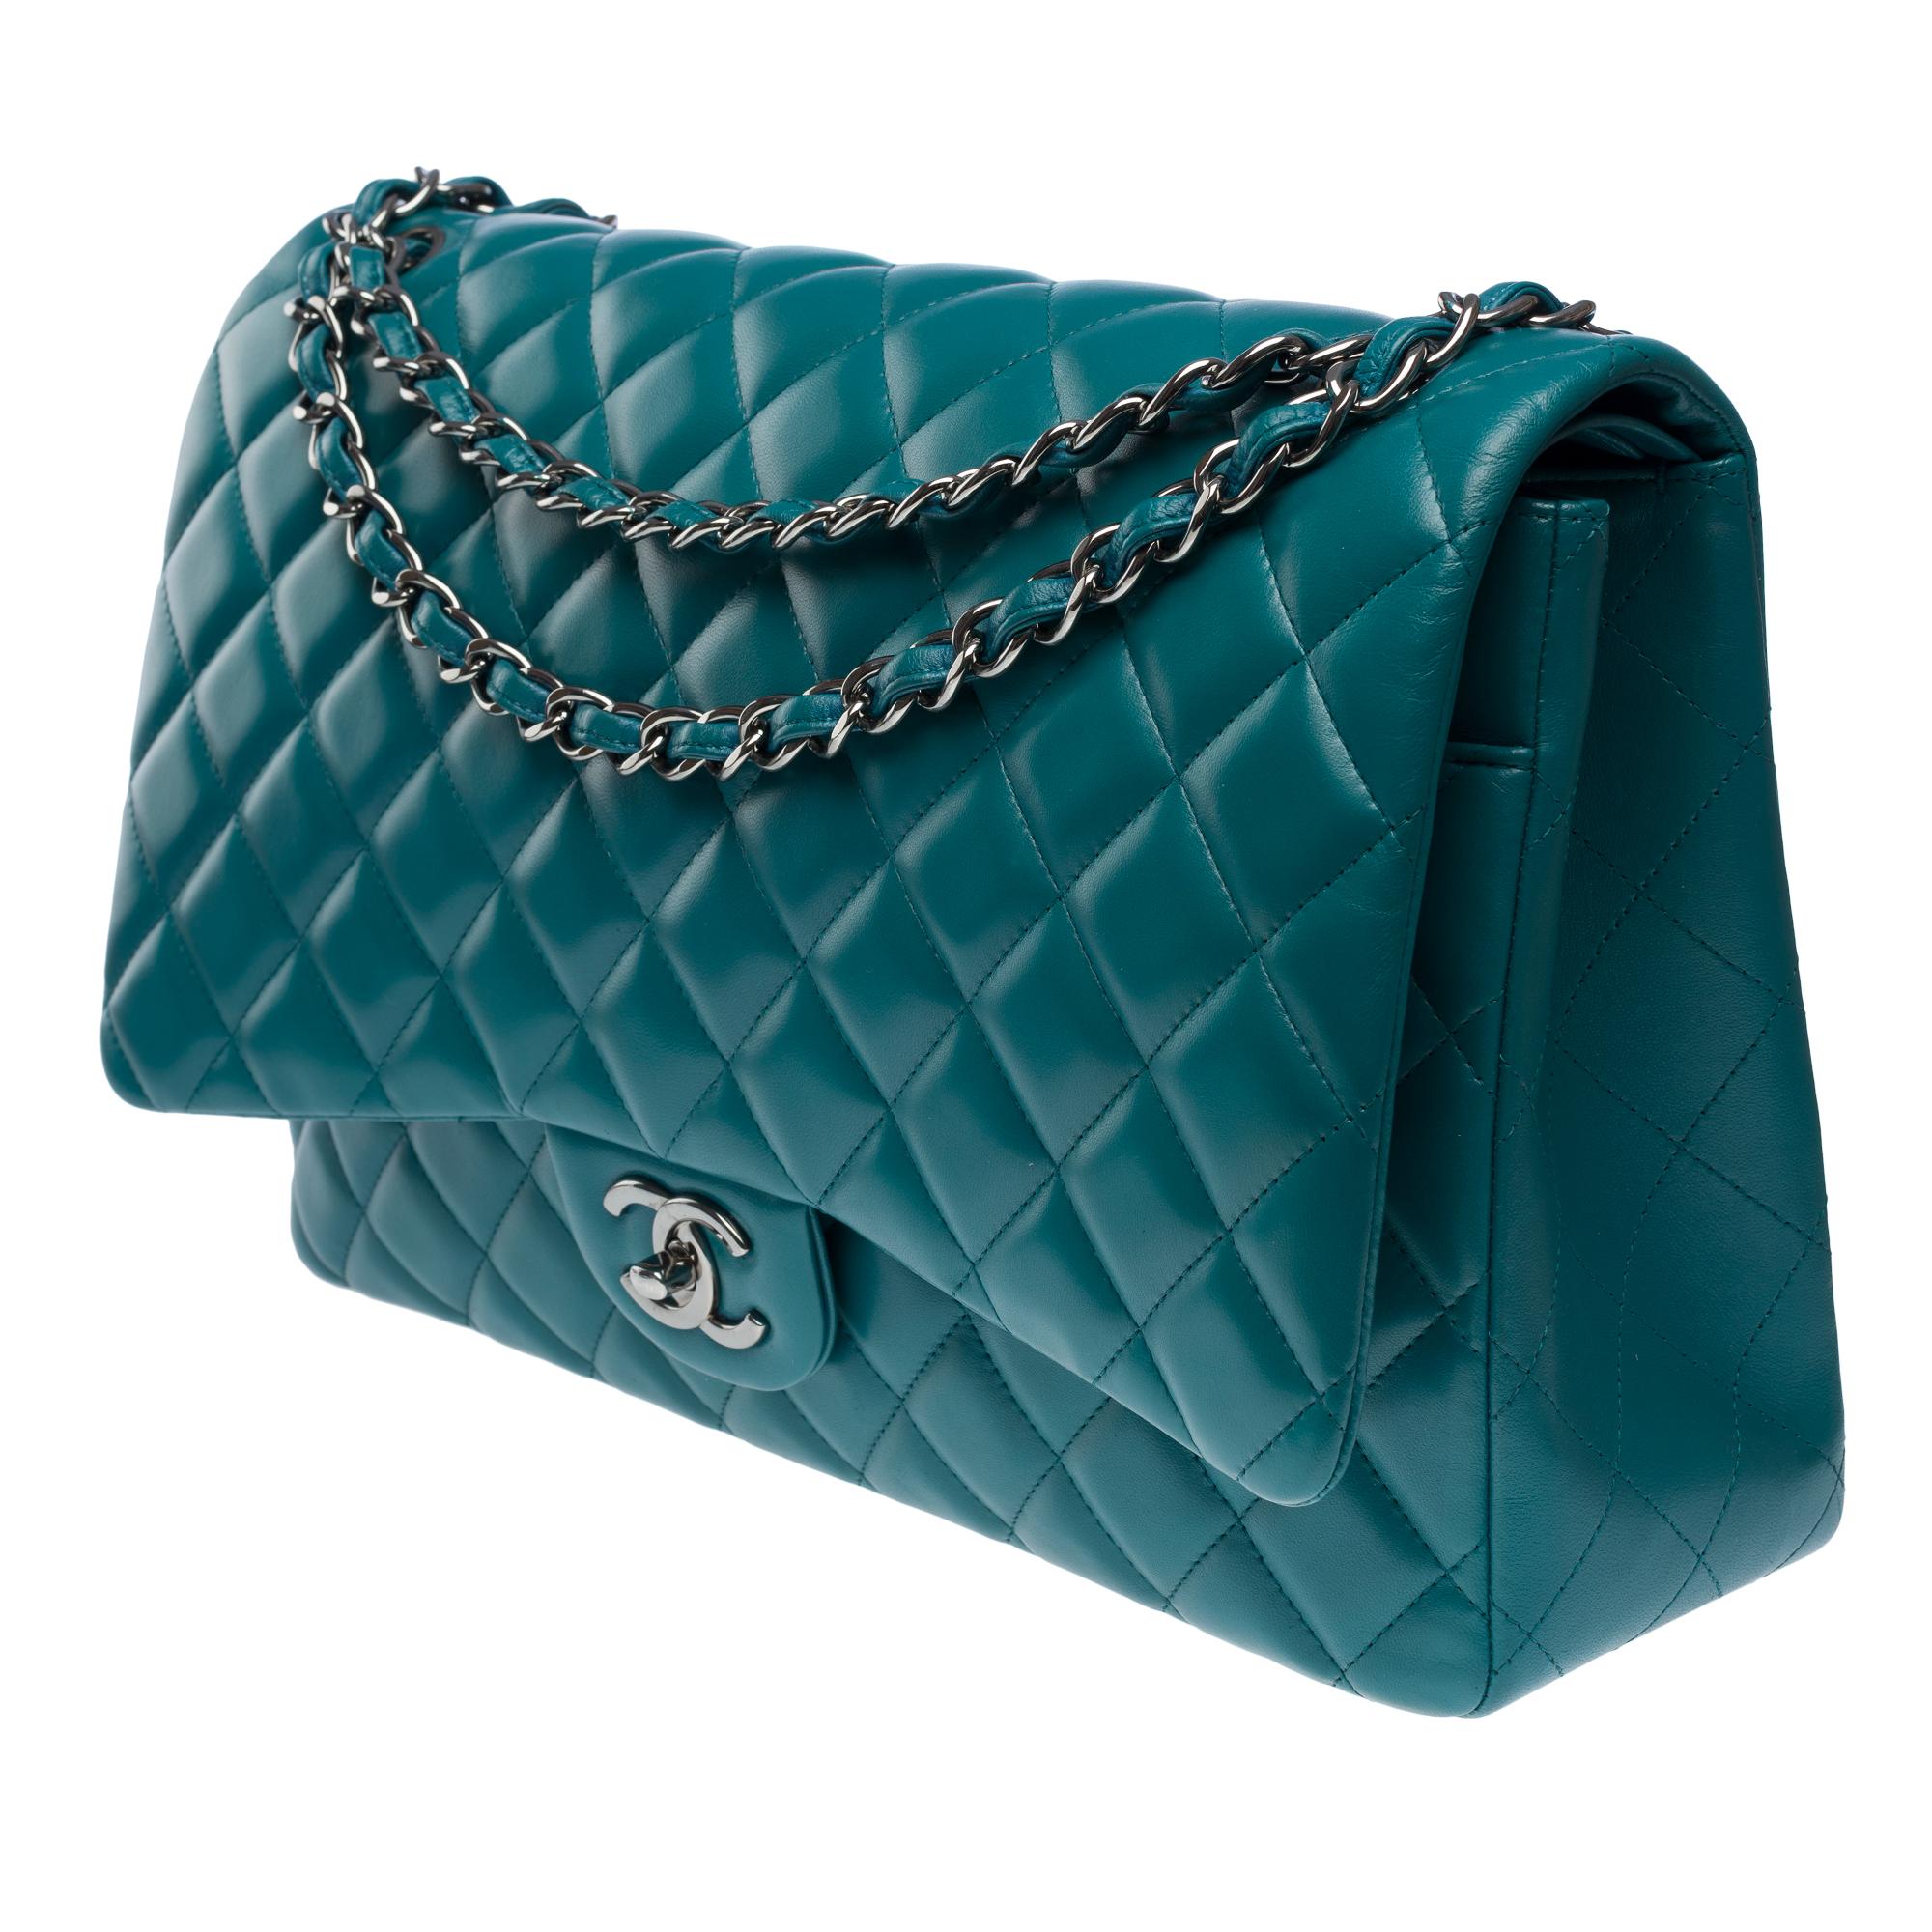 Chanel Timeless Maxi Jumbo shoulder bag in Blue quilted lambskin leather, SHW For Sale 1